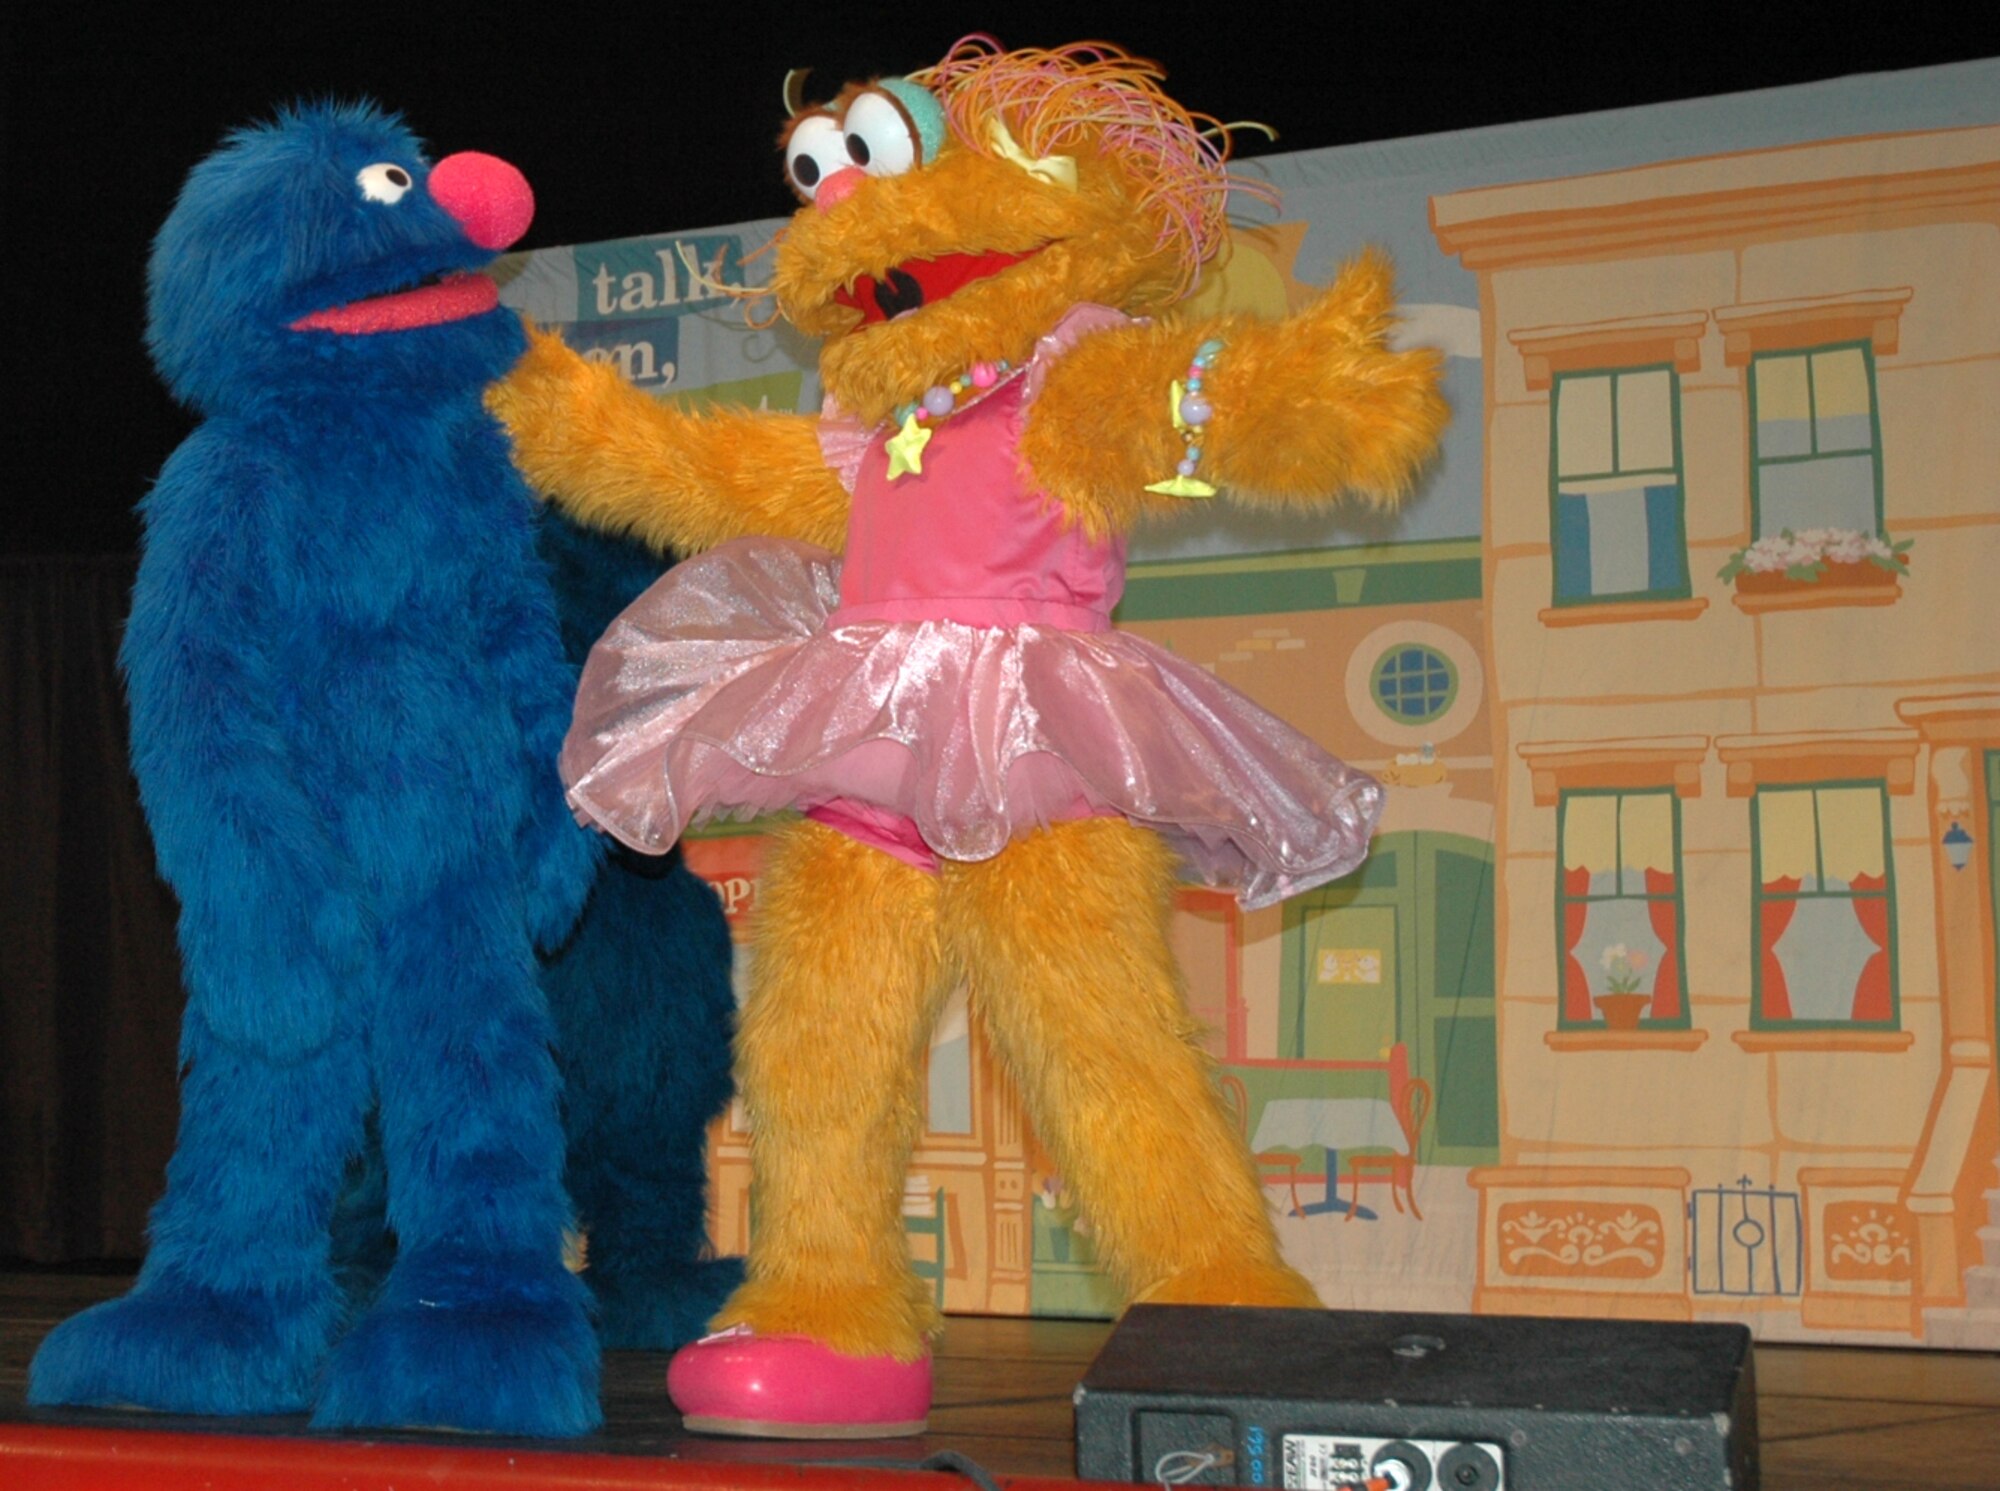 A muppet sings to Grover during the live performance at North Ridge High School in Layton, August 1.  (U.S. photo by Airman 1st Class Robby Hedrick)